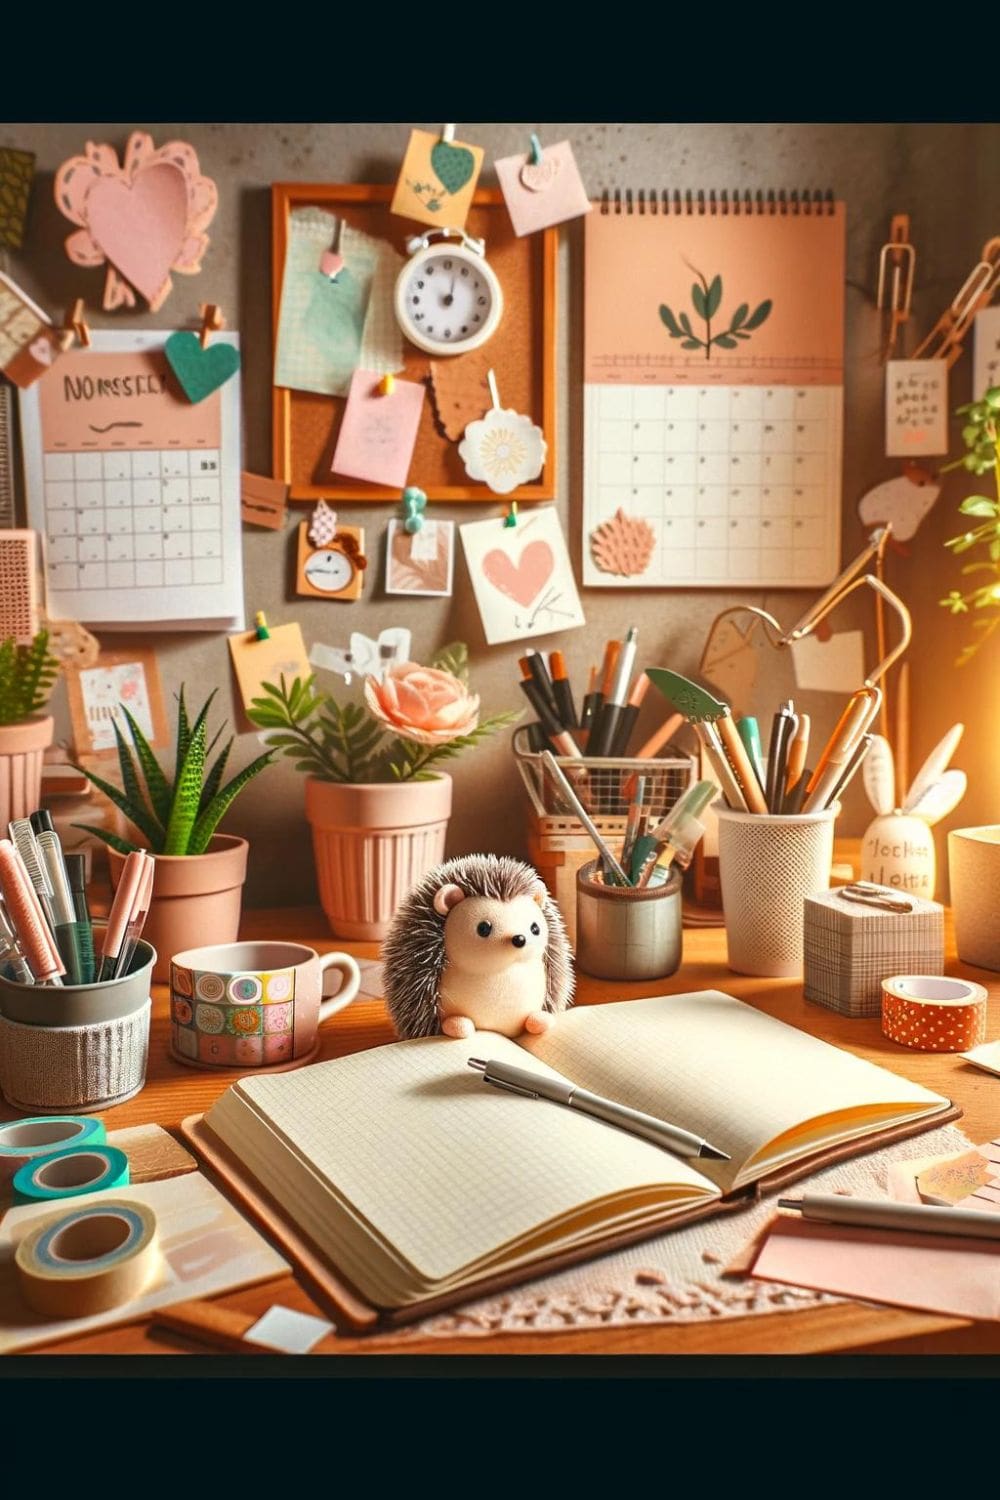 A photo of a stuffed hedgehog sitting on top of a notebook on a desk.